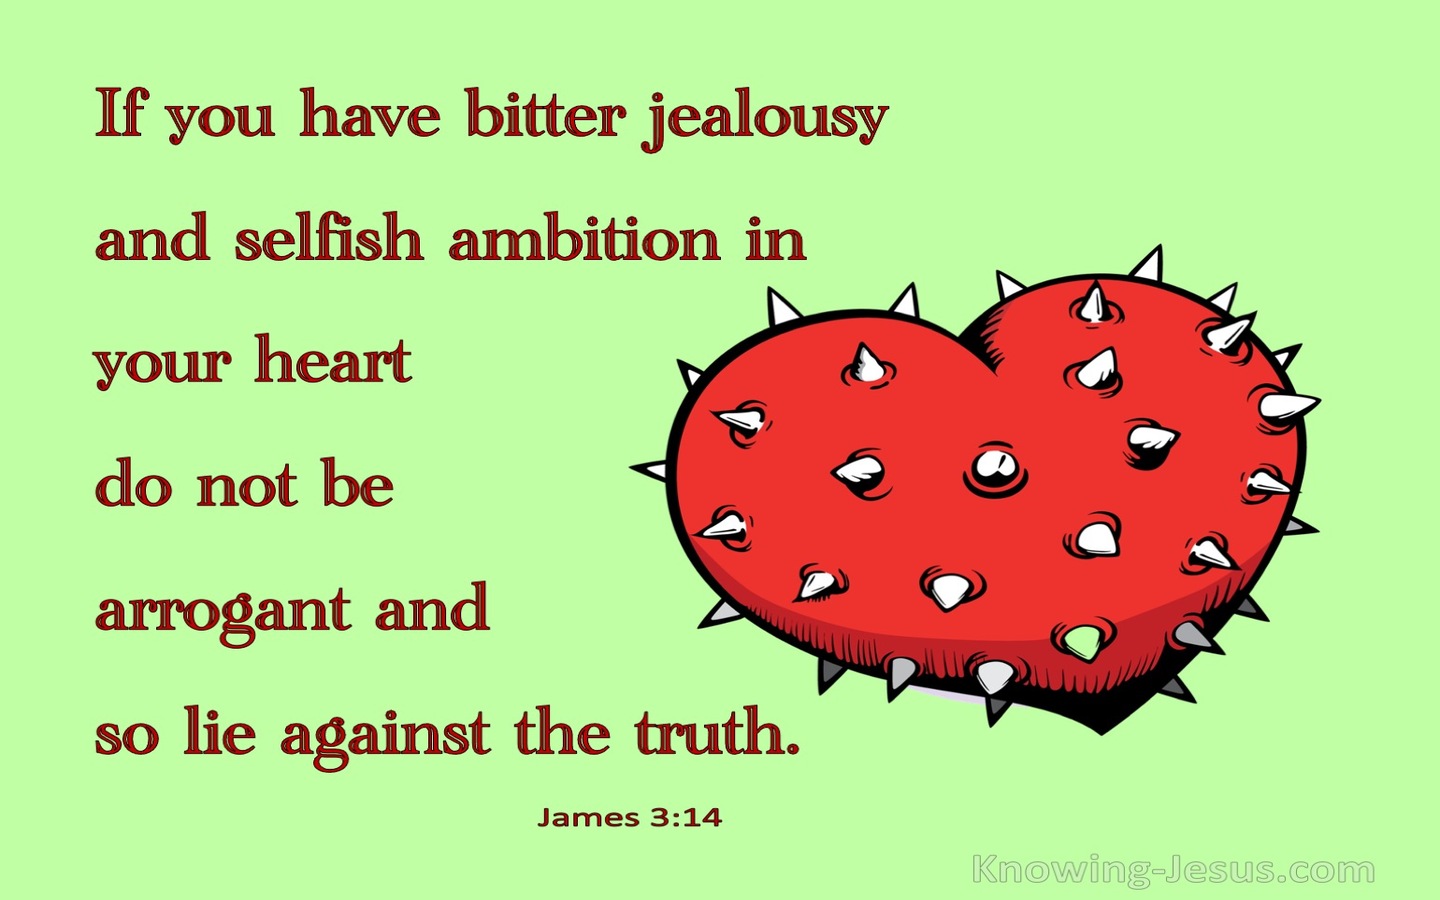 James 3:14 Bitter Jealousy And Selfish Ambition In Your Heart (green)